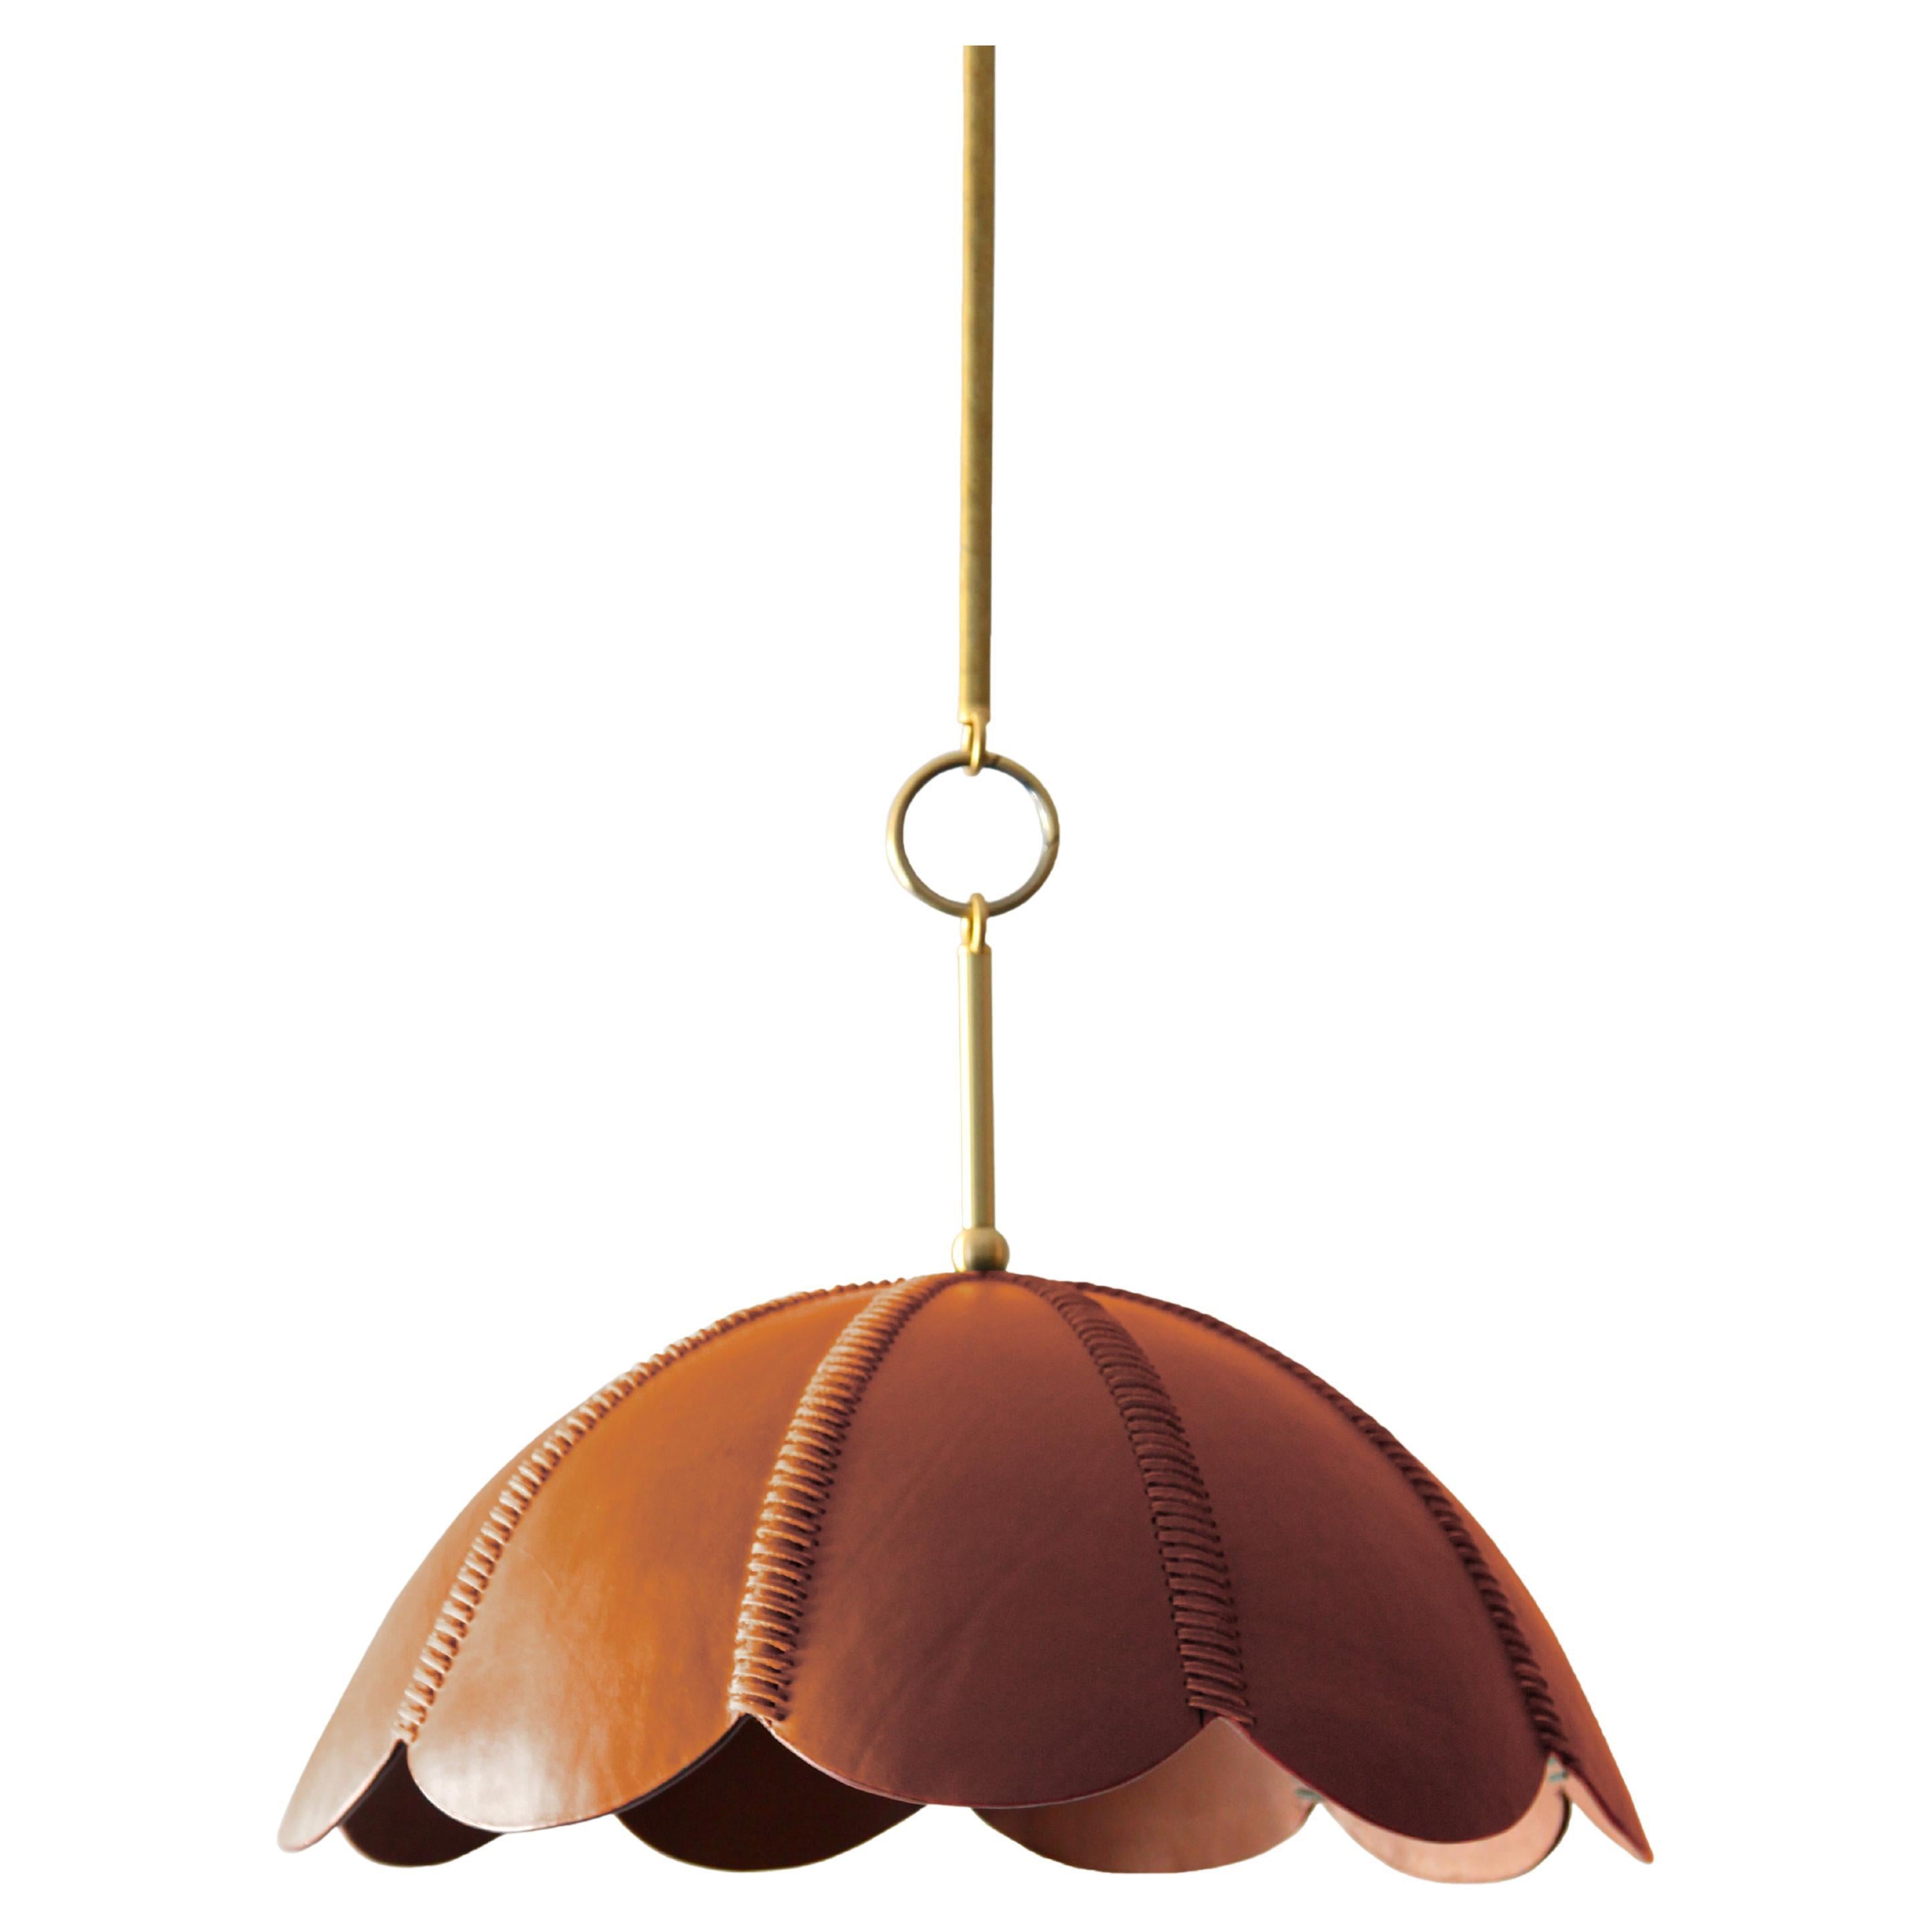 Leather Pendant Light in Camel, Capa II, Talabartero Collection Saddle Lamp For Sale